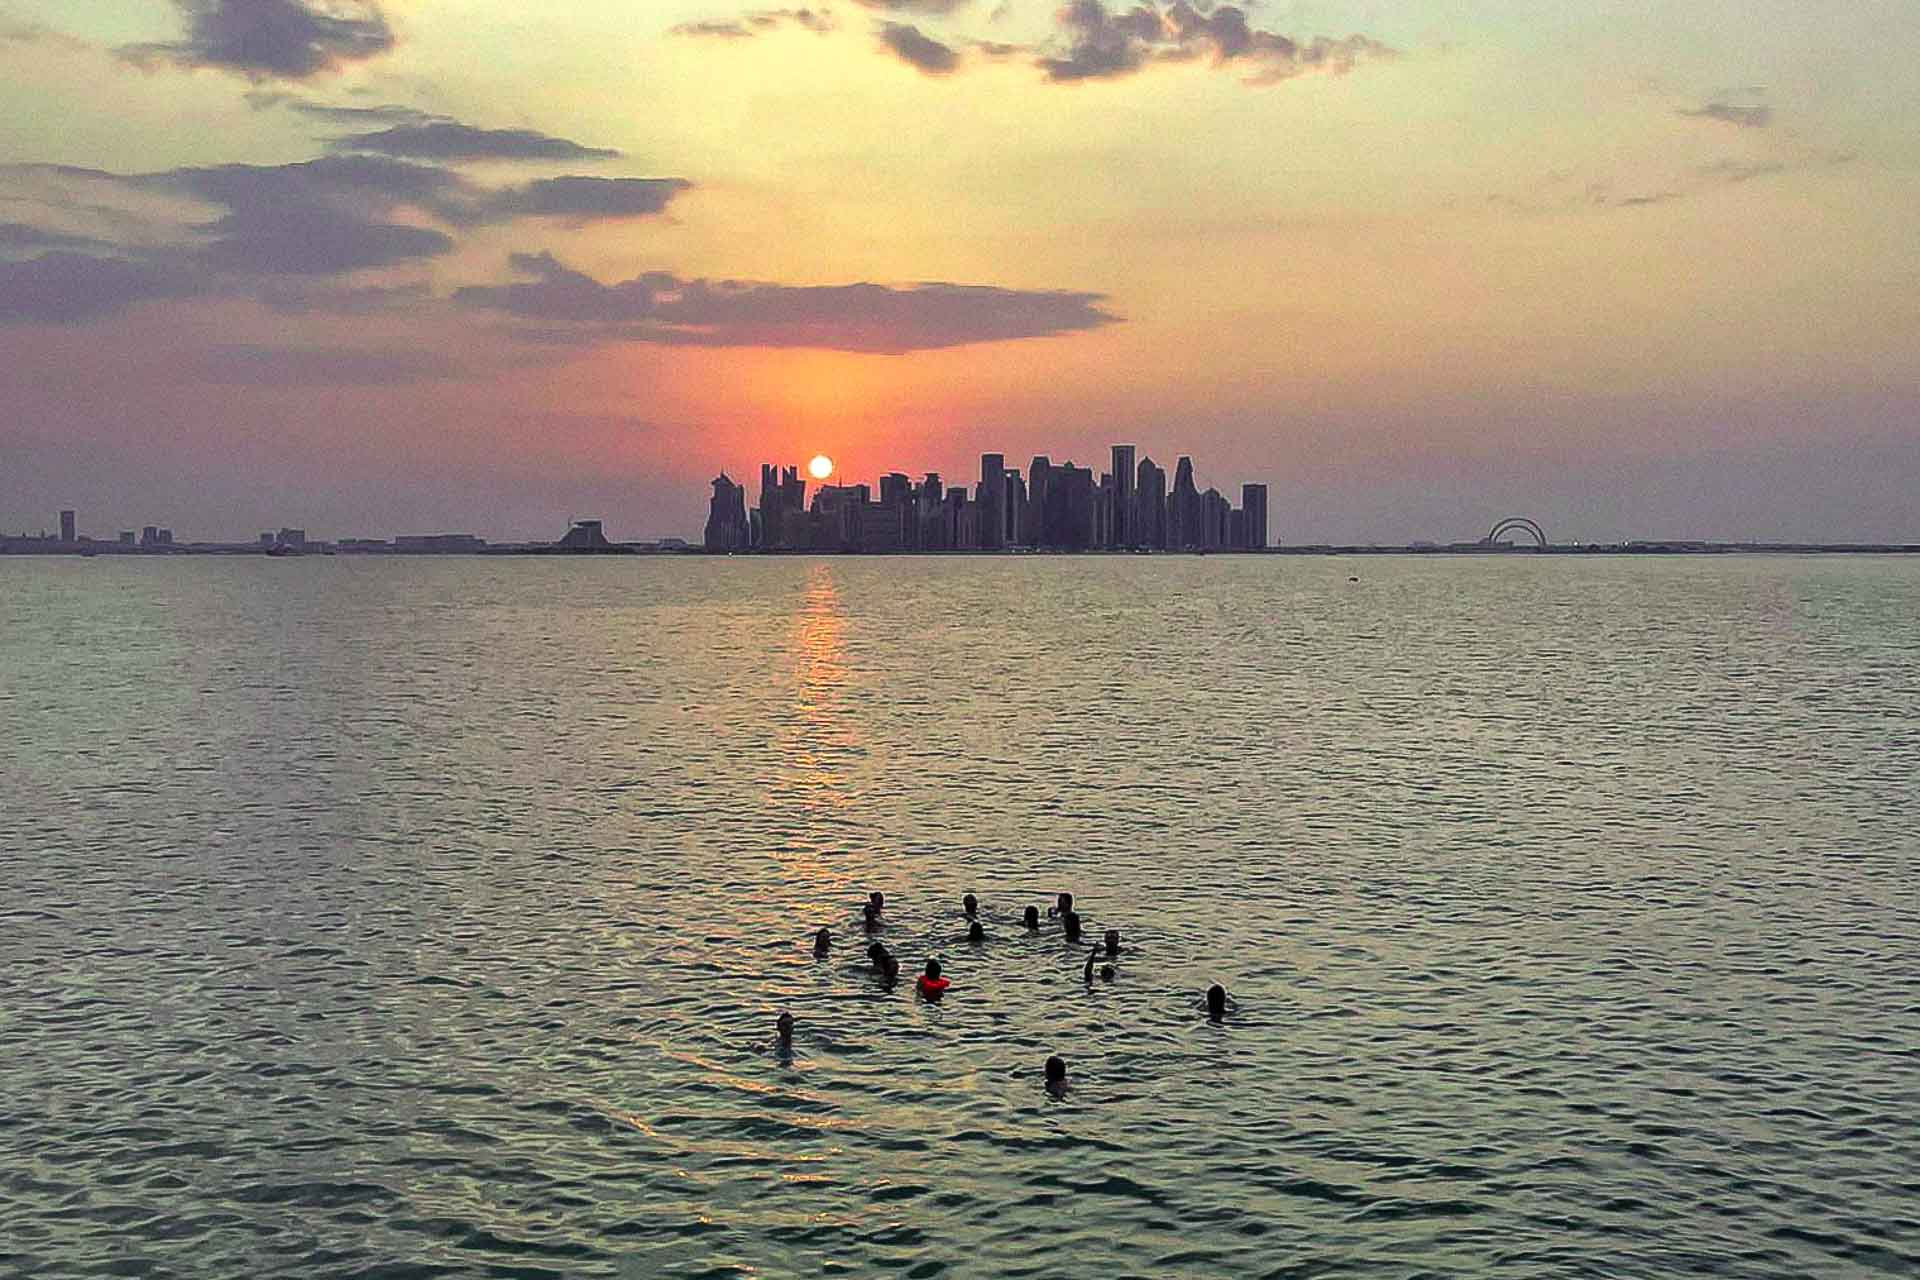 top view from people in the water with many large building far in the background and the sun setting in between them